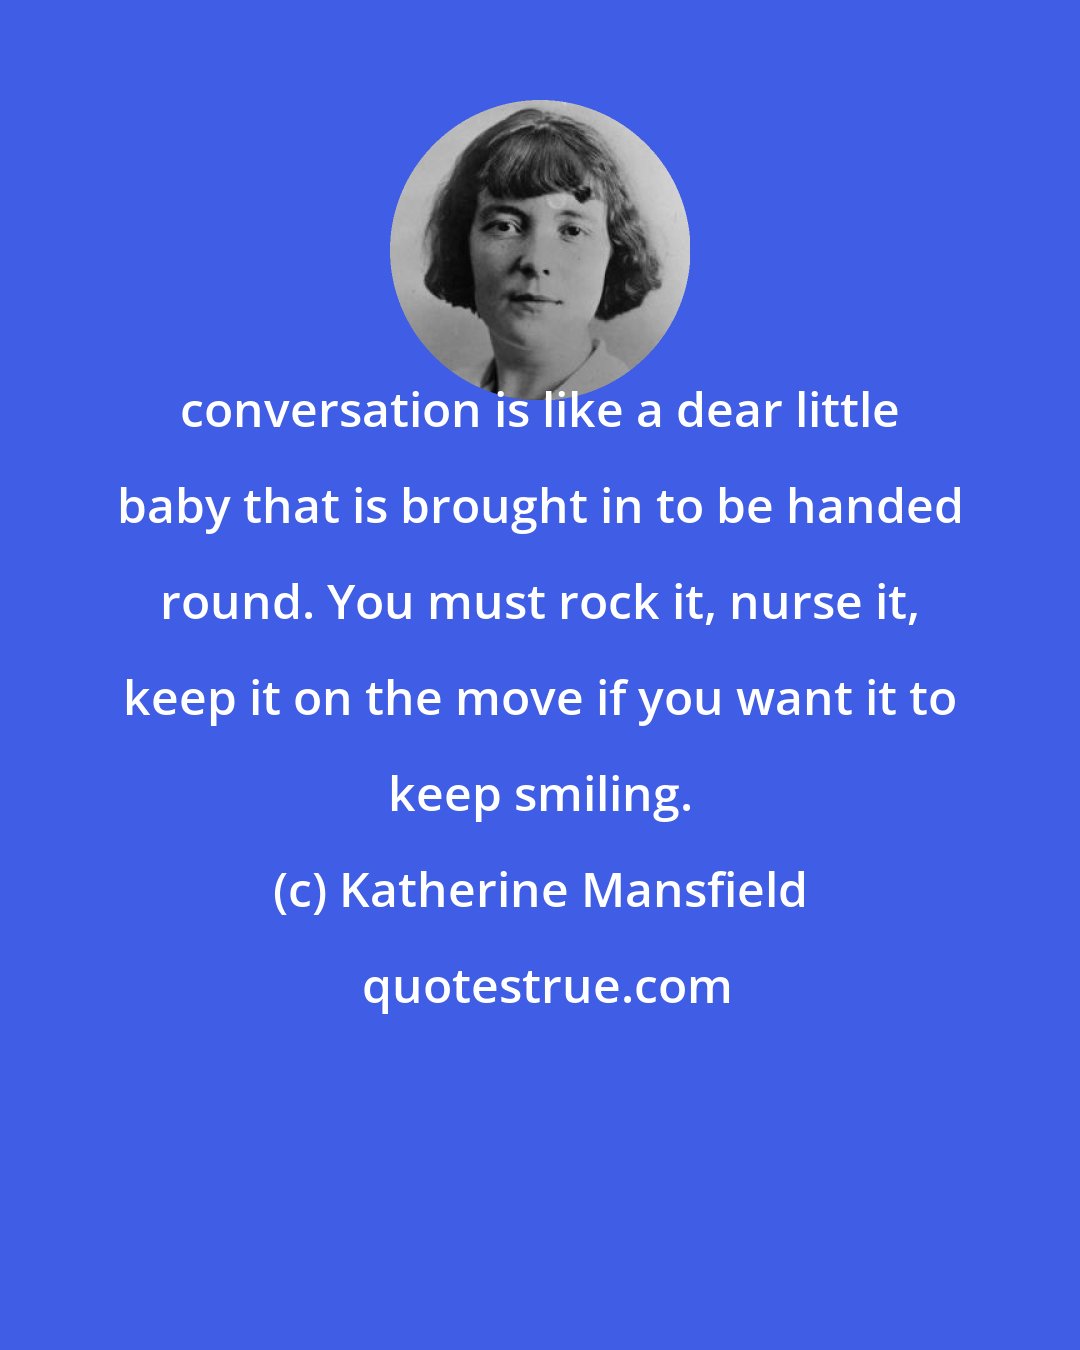 Katherine Mansfield: conversation is like a dear little baby that is brought in to be handed round. You must rock it, nurse it, keep it on the move if you want it to keep smiling.